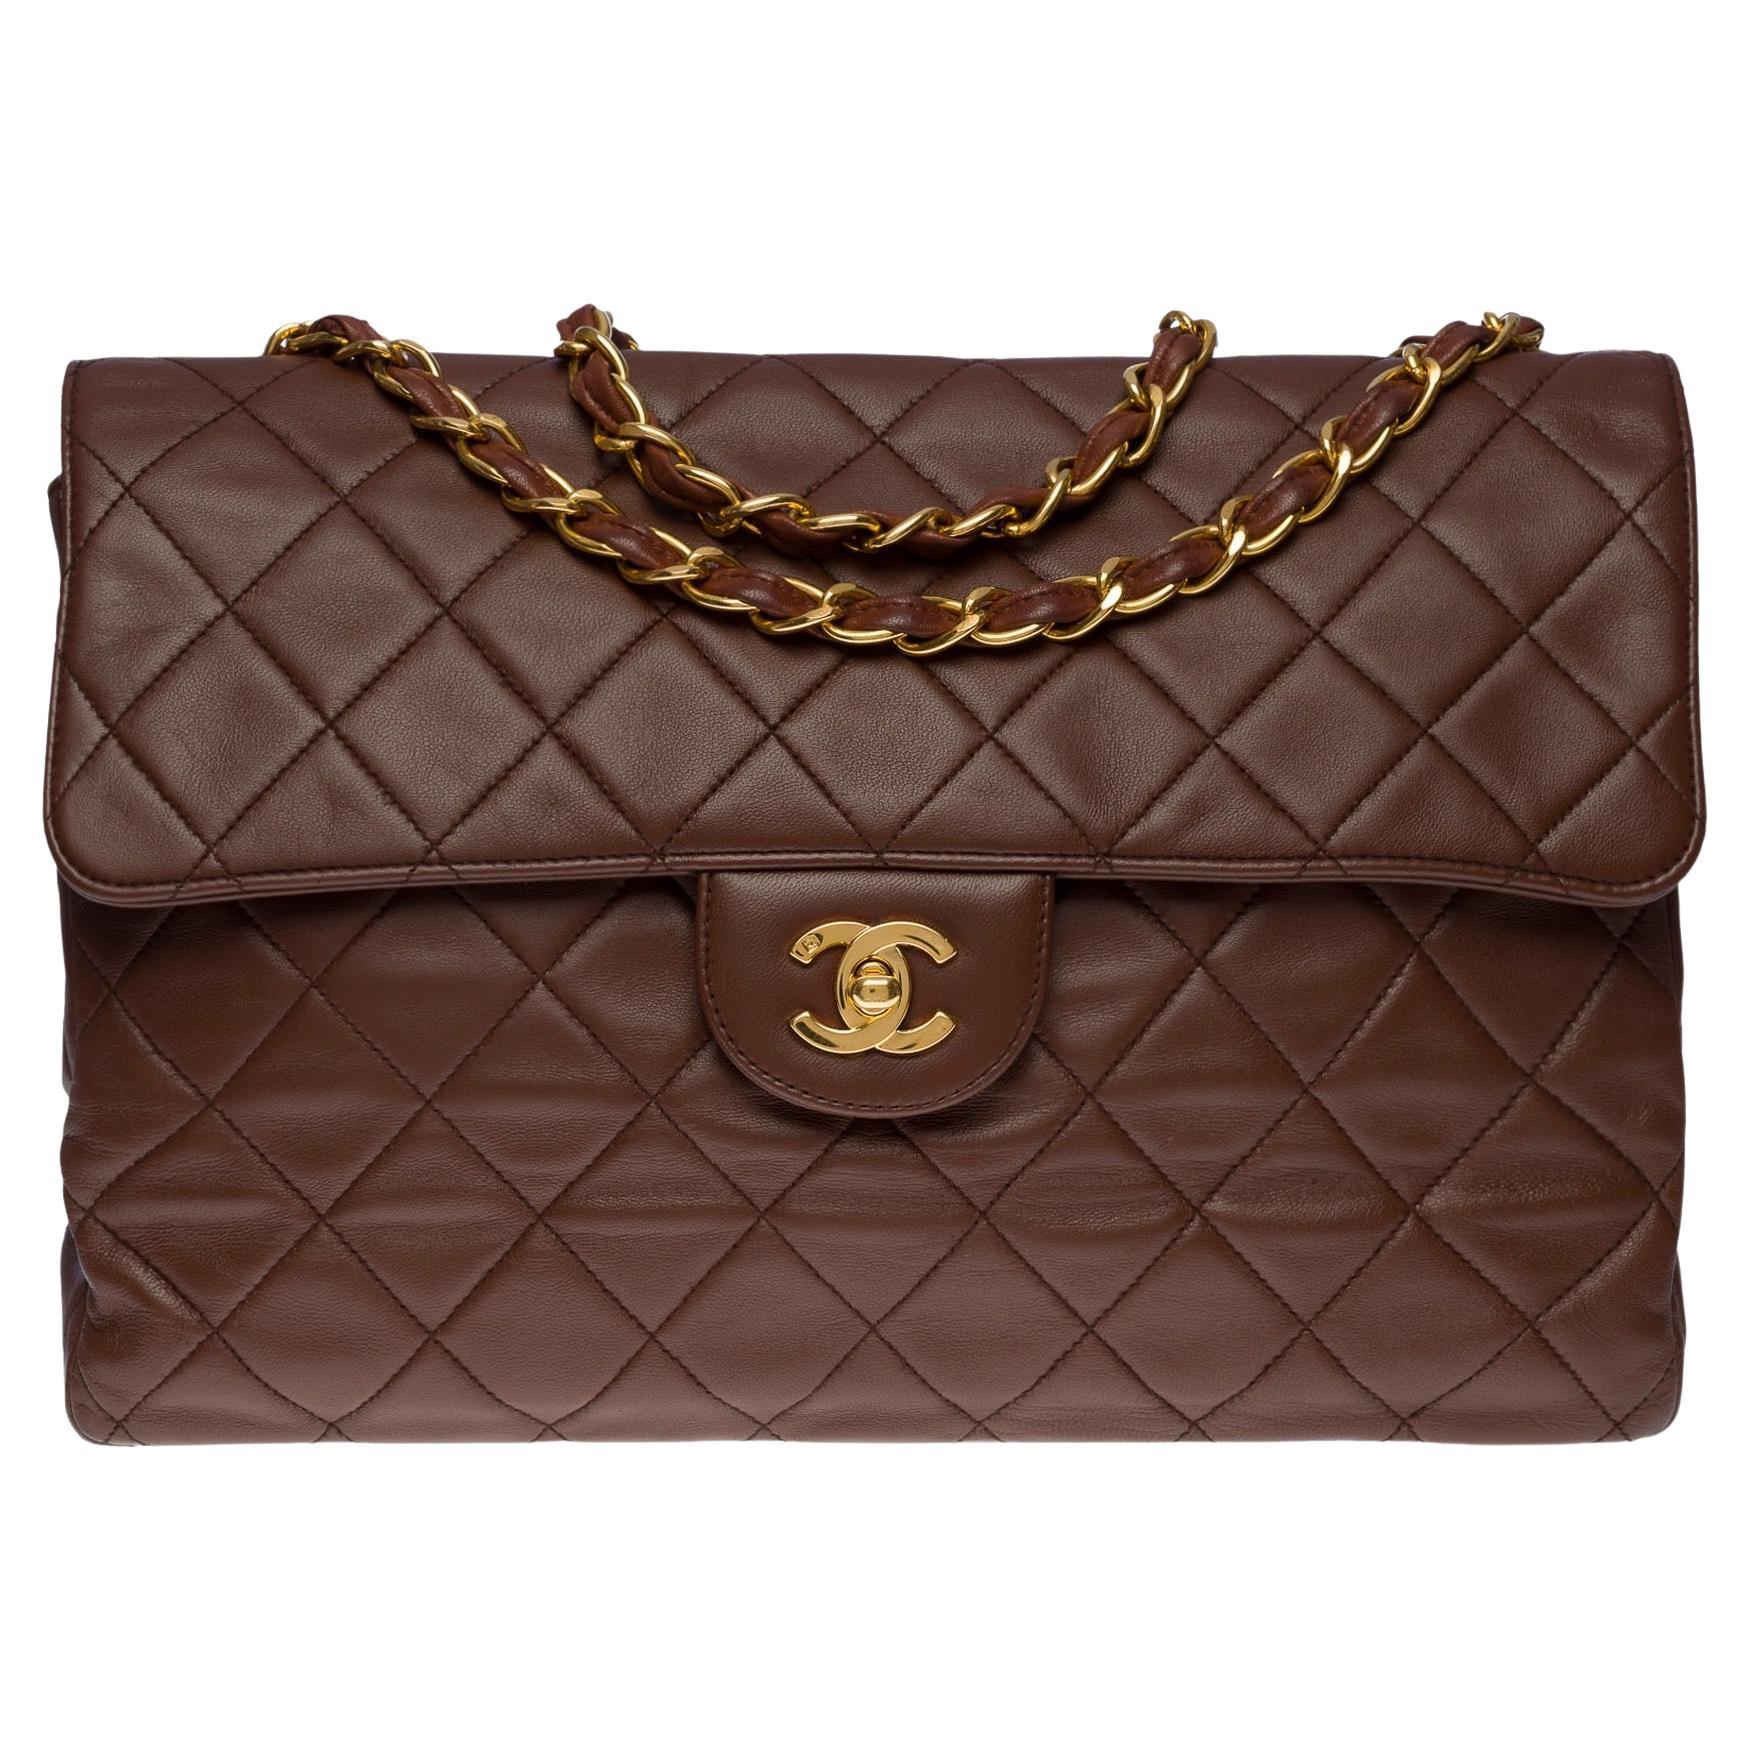 Majestic Chanel Timeless/Classic jumbo flap bag in brown quilted leather, GHW For Sale